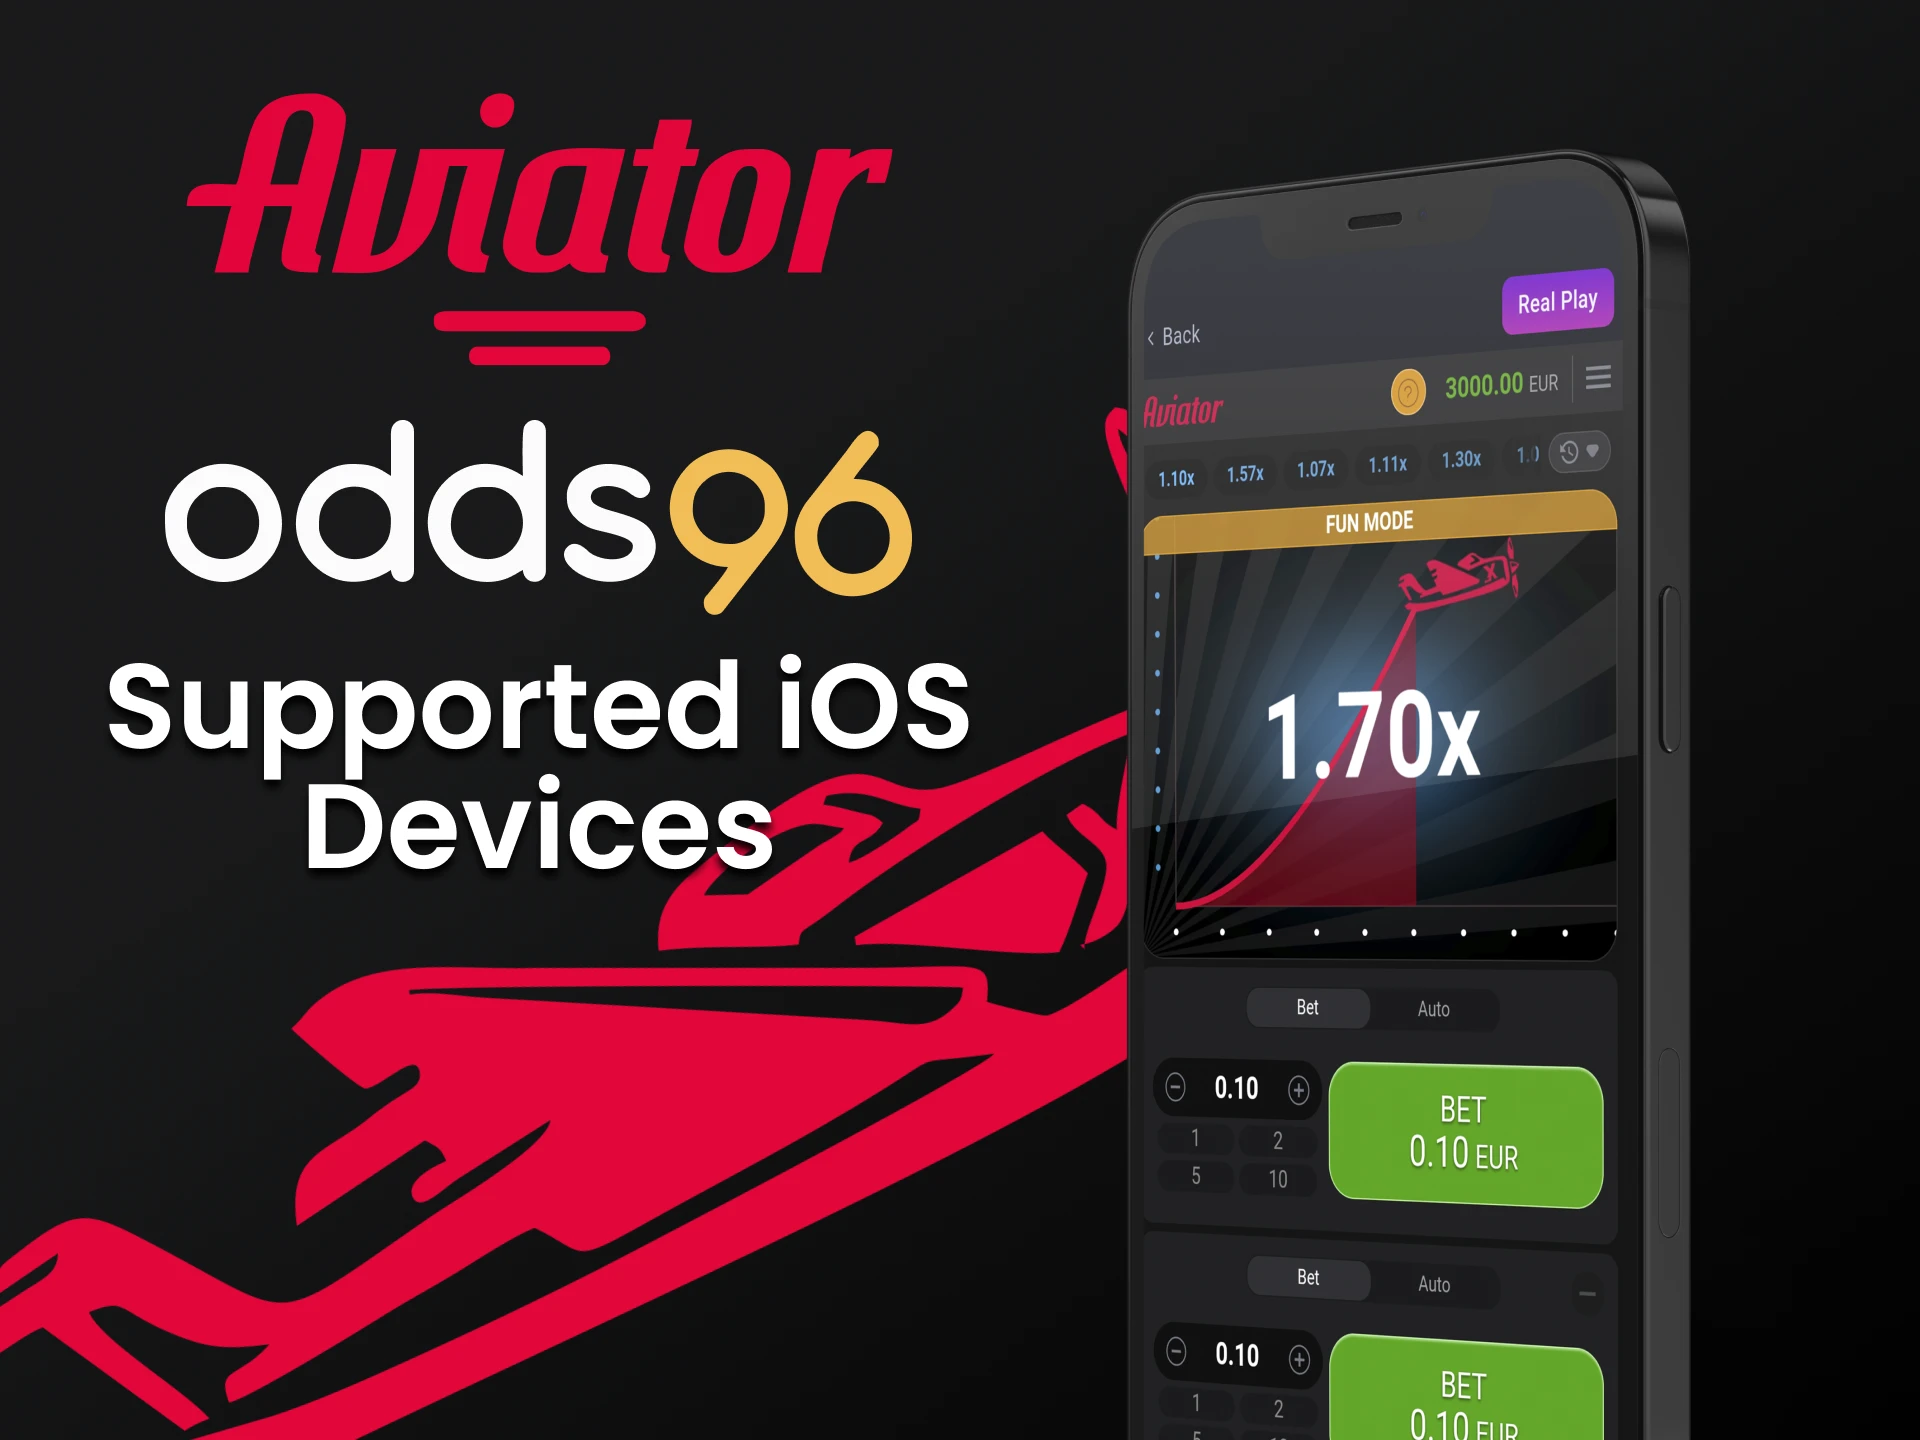 Play Aviator on Odds96 through your iOS device.